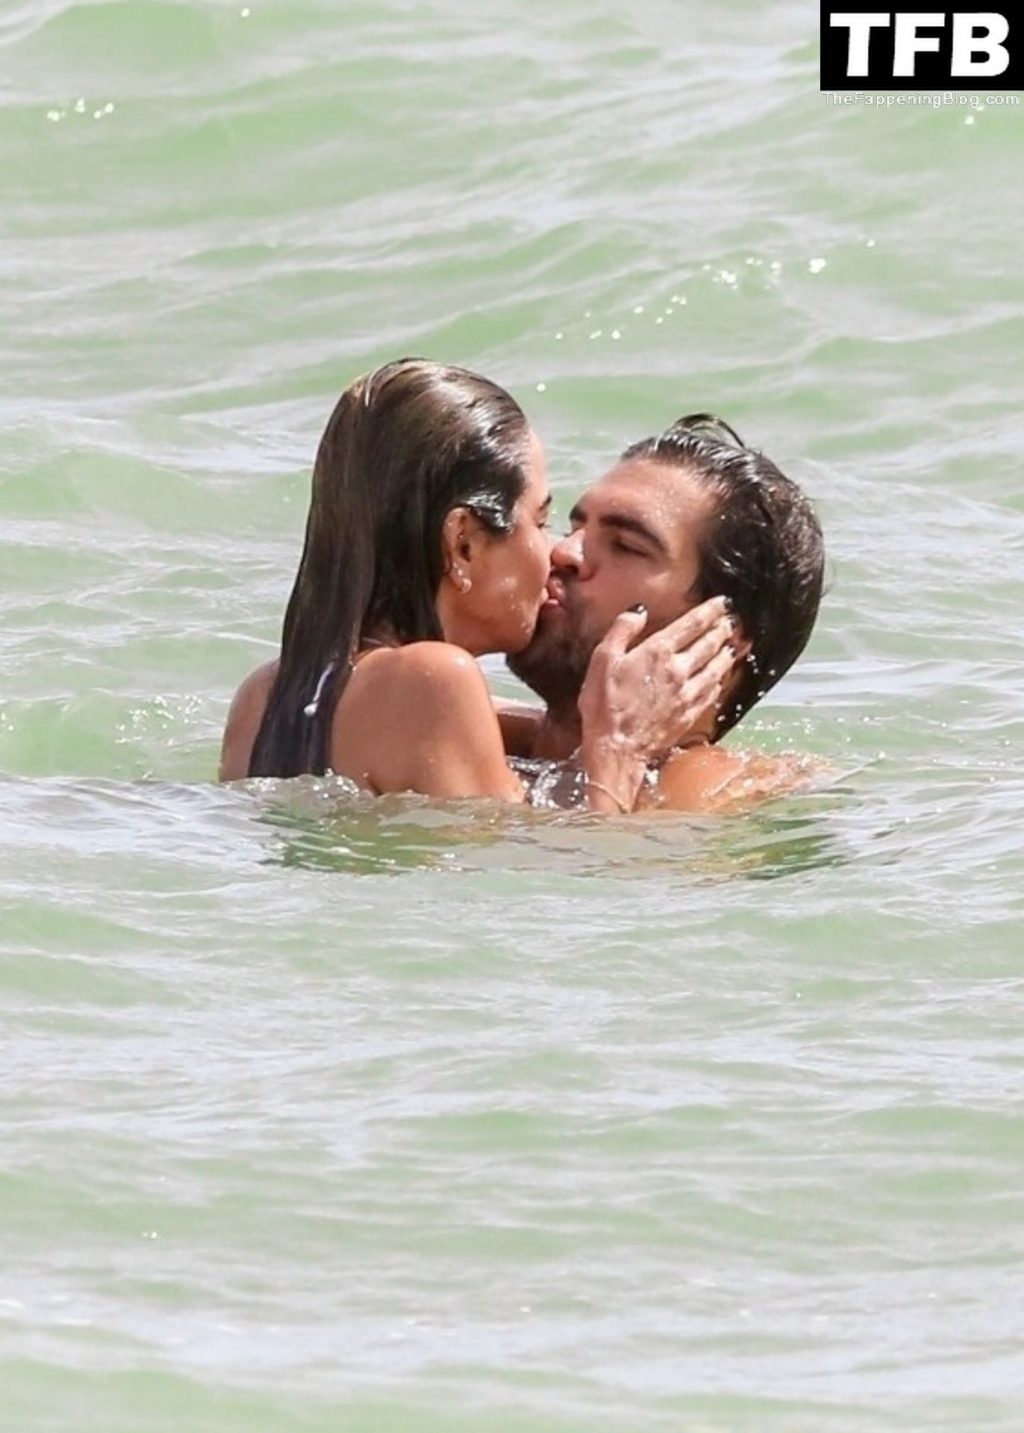 Sexy Luciana Gimenez Starts The New Year Soaking Up The Sun With Her Boyfriend In Brazil